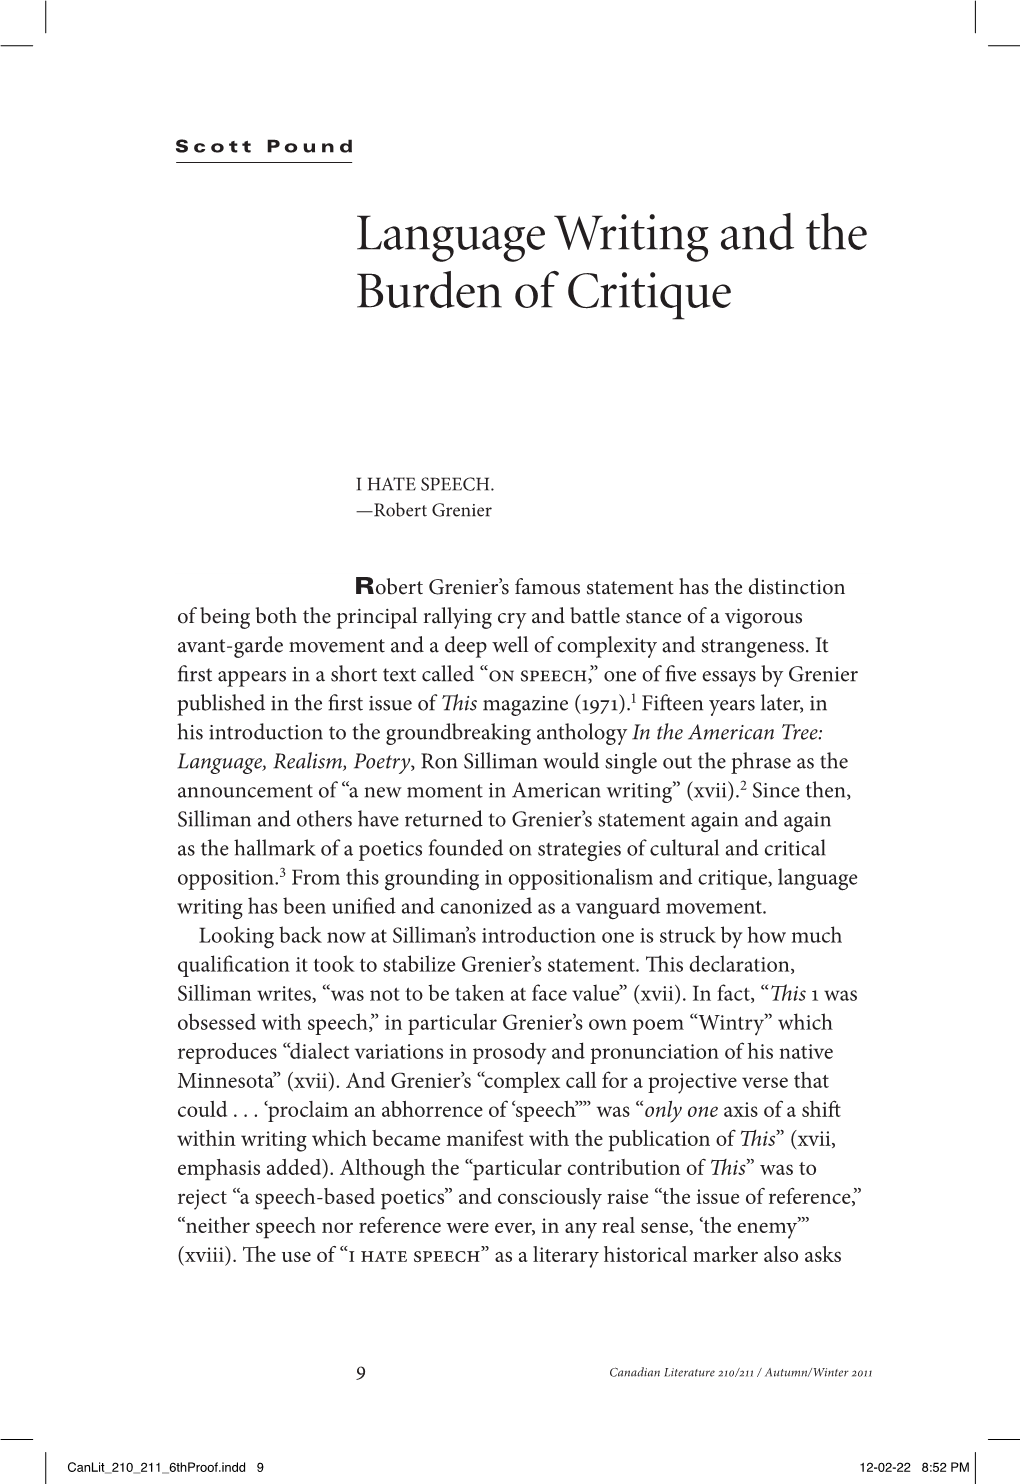 Language Writing and the Burden of Critique